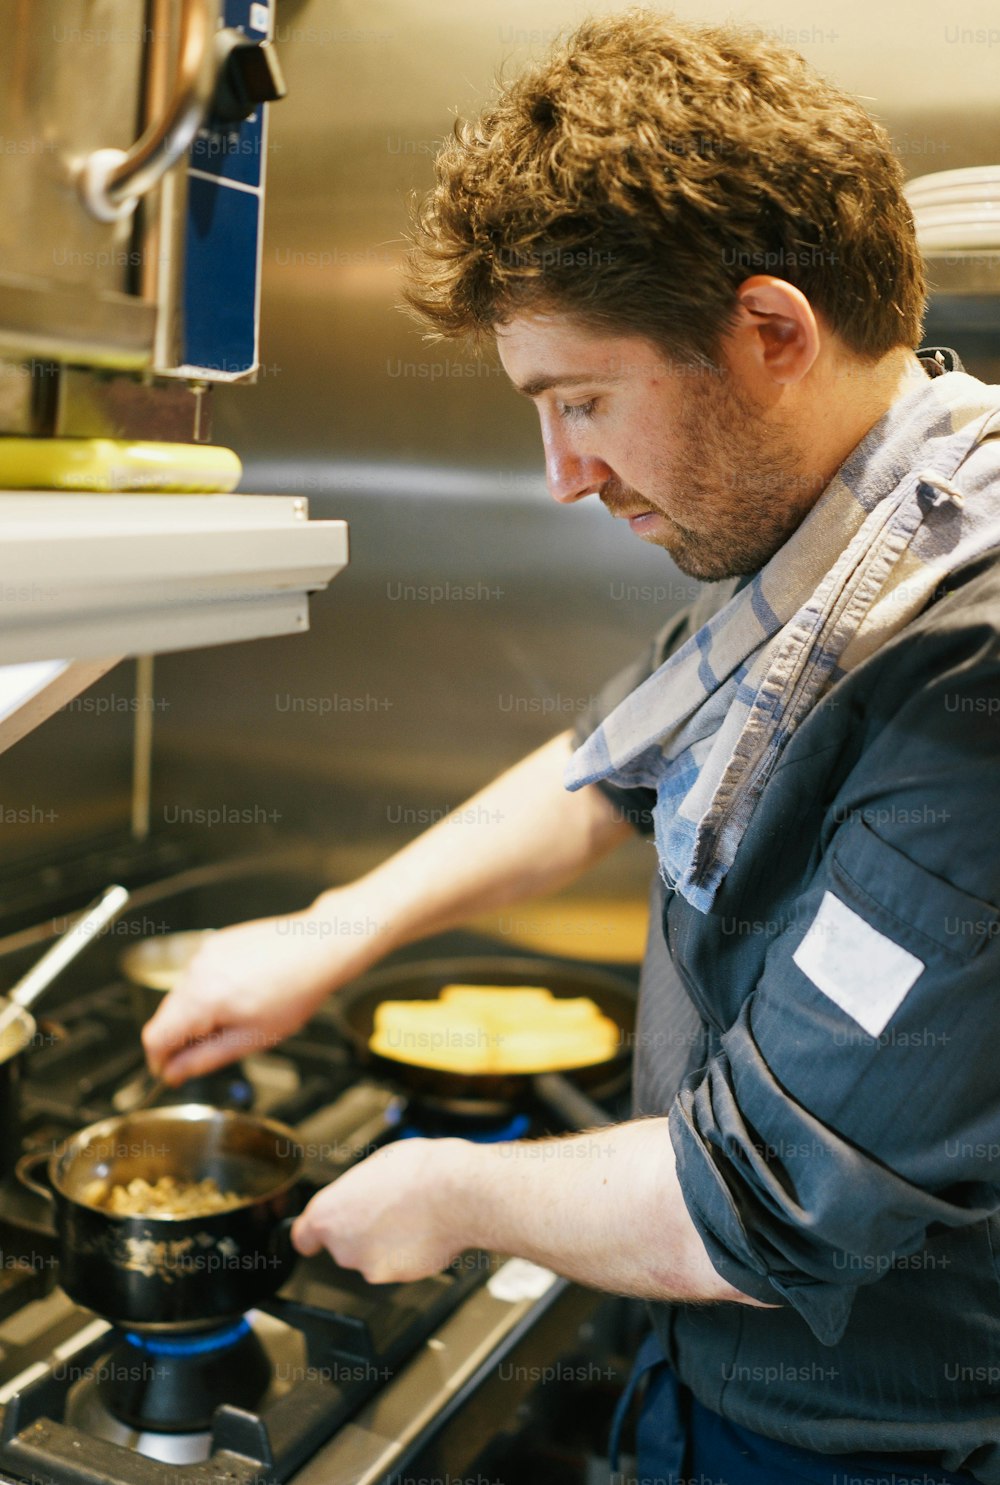 a man cooking food on a stove in a kitchen